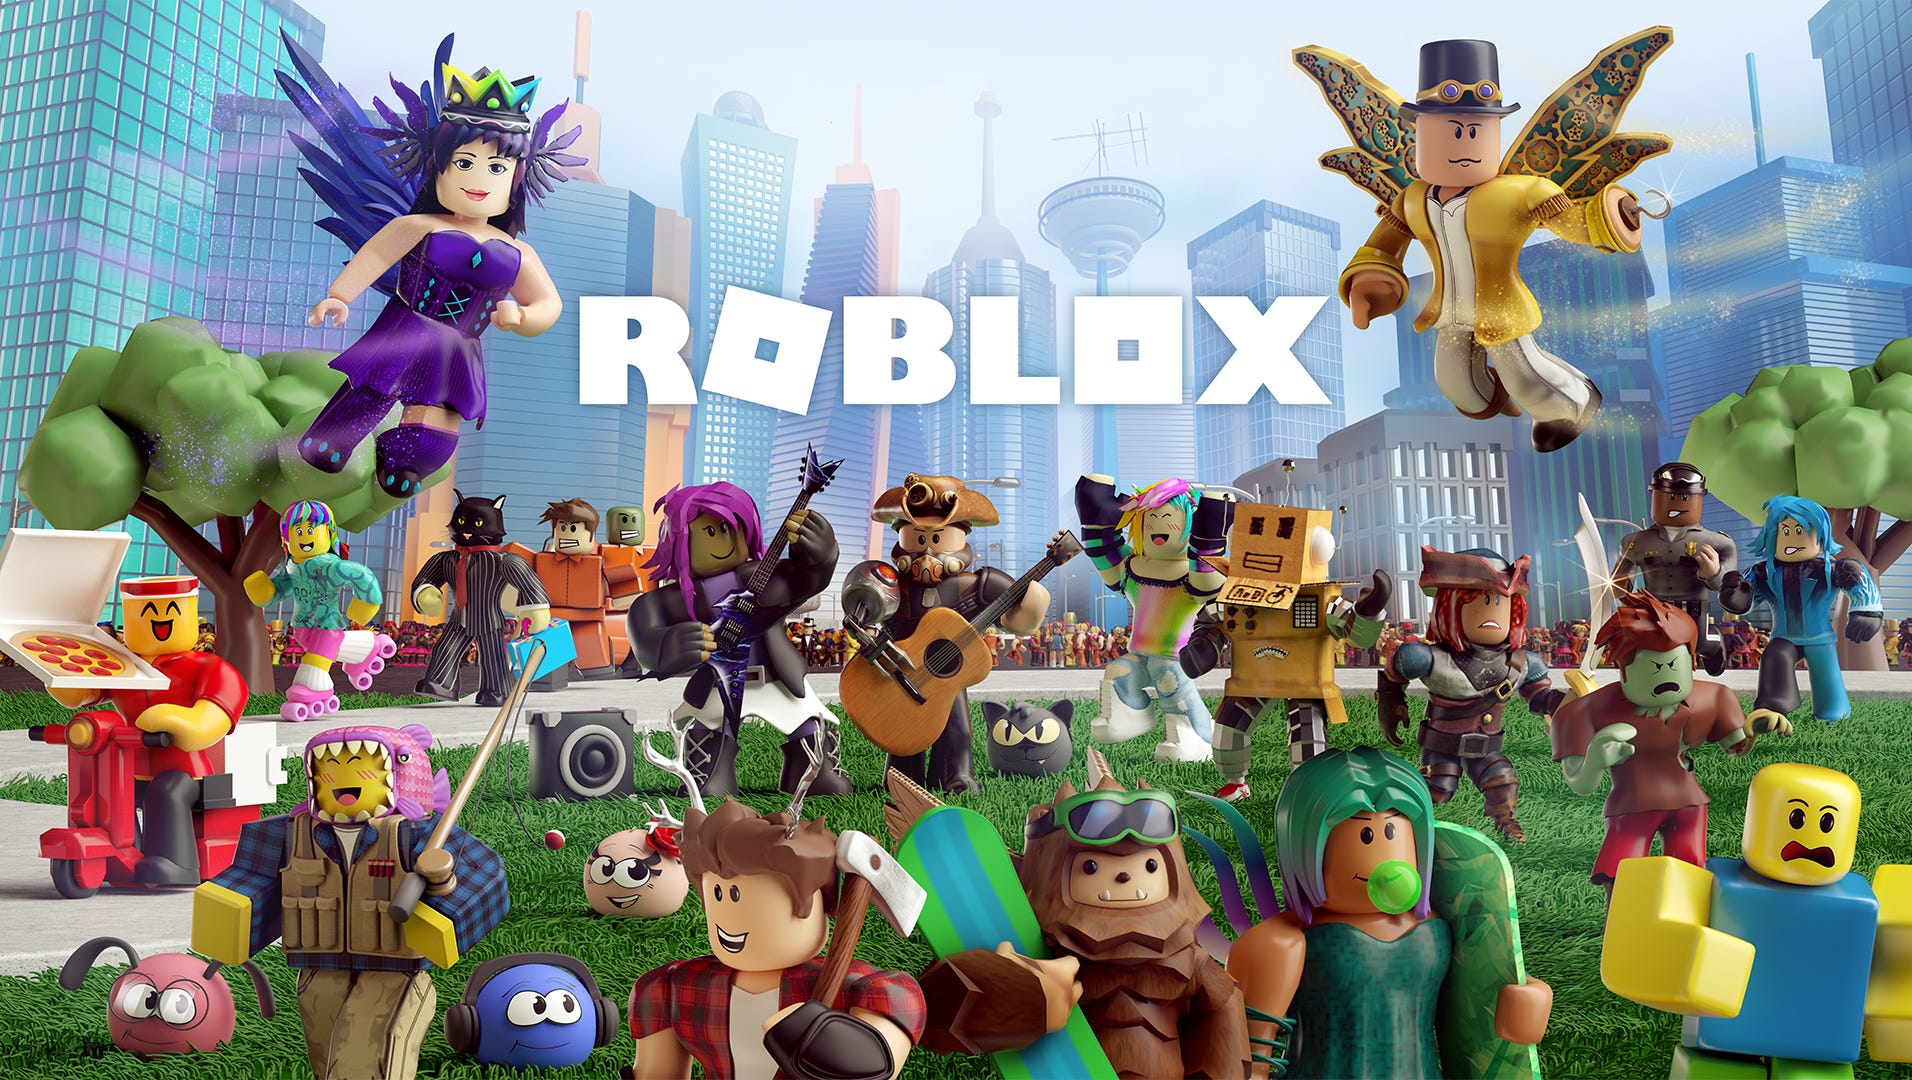 Roblox Kids Game Shows Character Being Sexually Violated Mom Warns - pictures of roblox characters no face